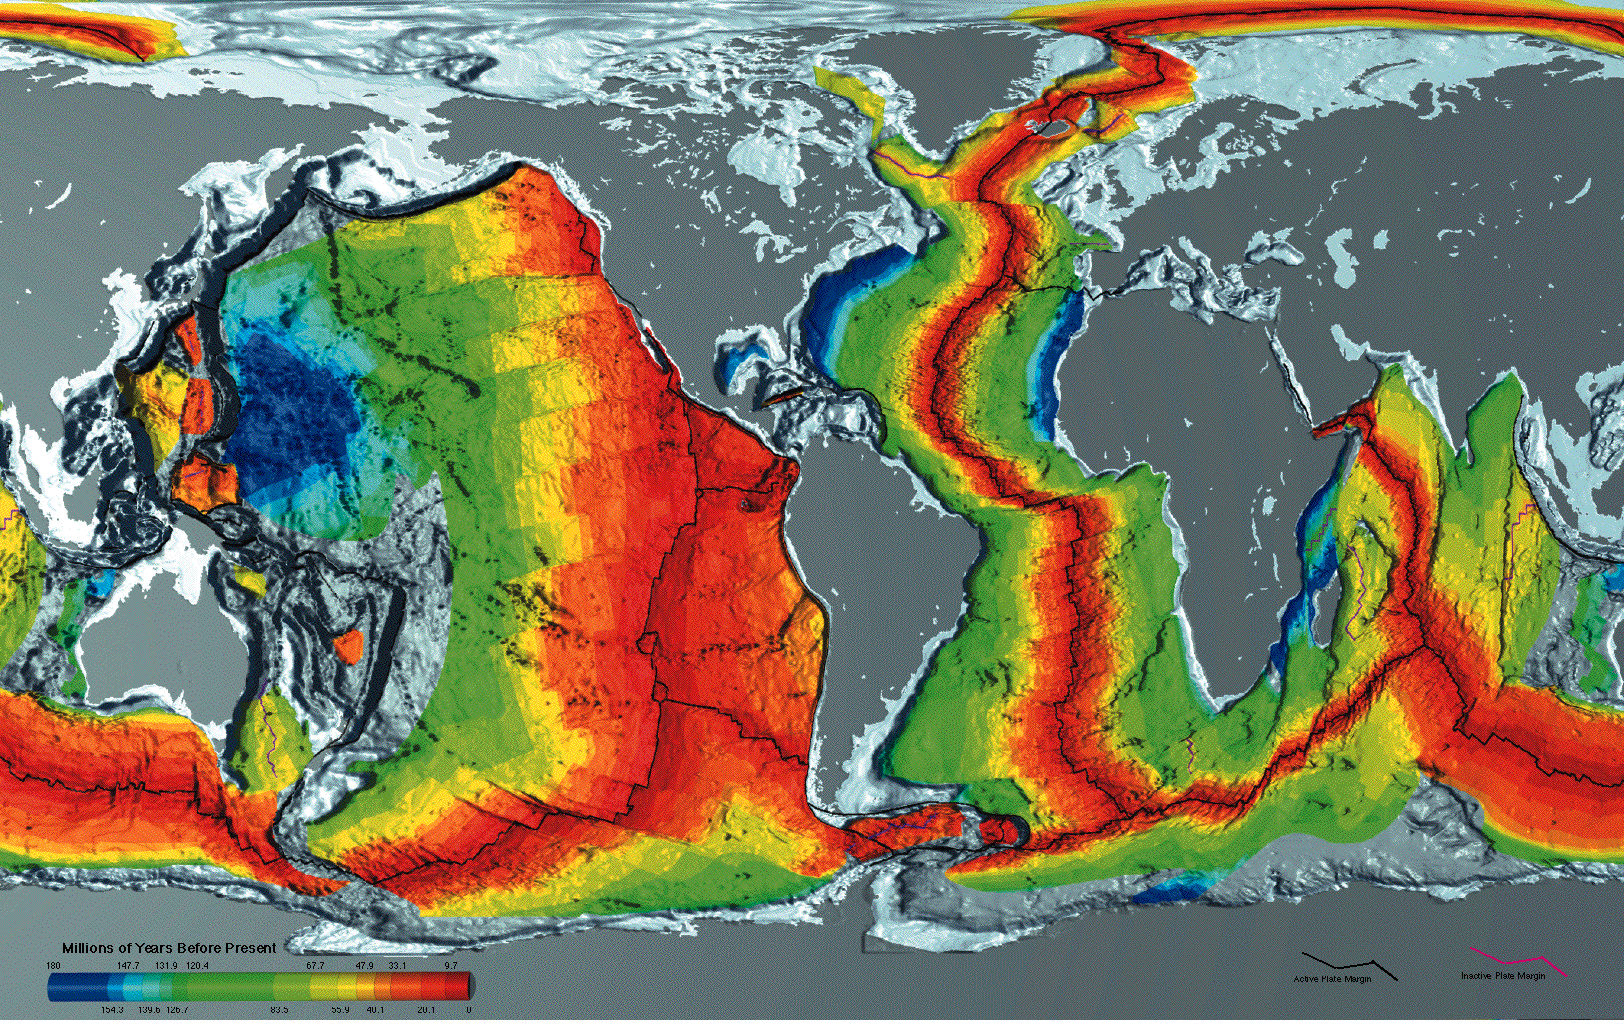 At What Depth Do The Earthquakes In Middle Of Atlantic Ocean Occur - The Earth Images Revimage.Org